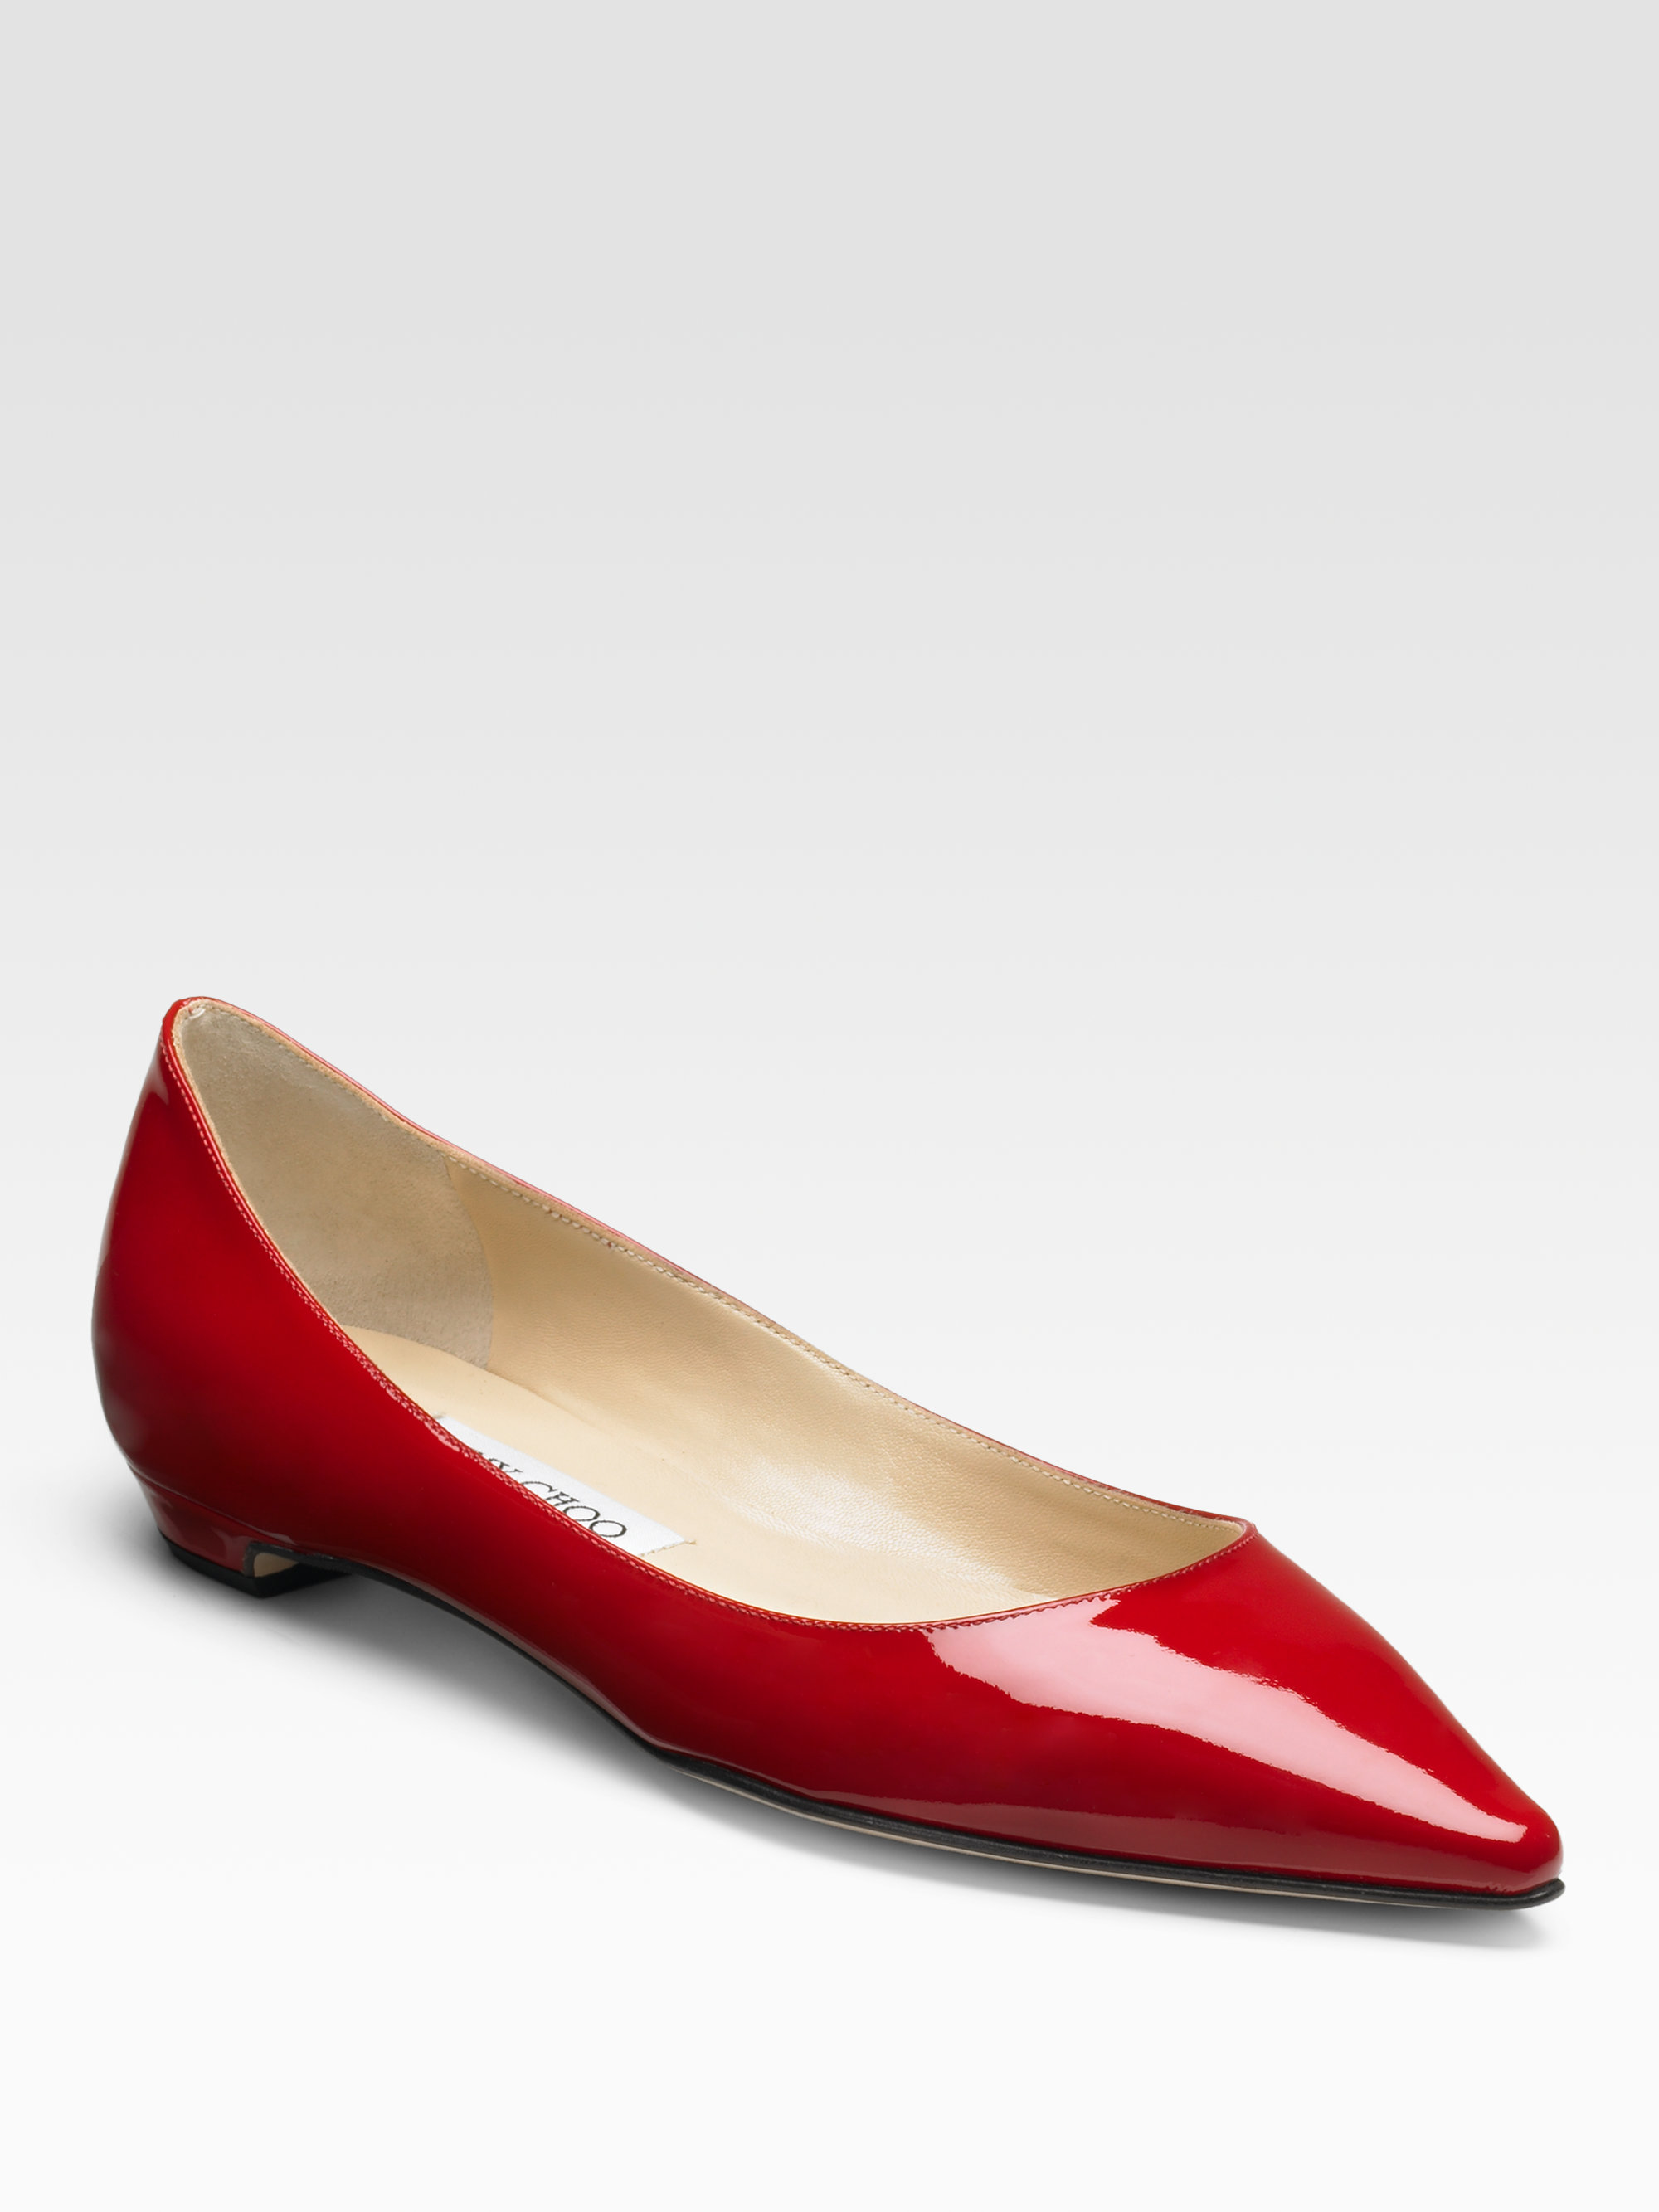 Lyst - Jimmy Choo Sandy Patent Leather Pointtoe Flats in Red